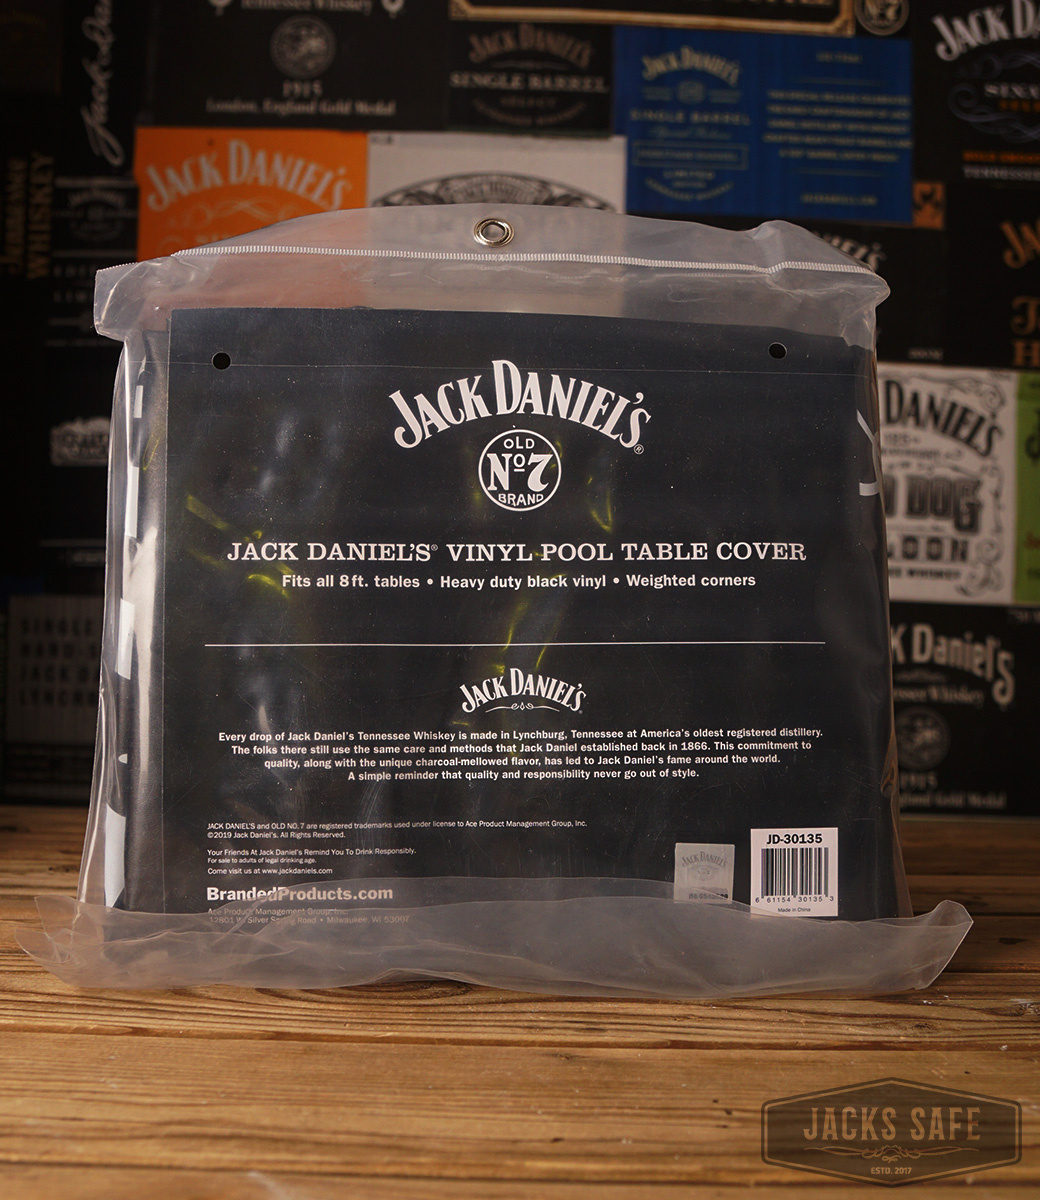 JACK DANIEL'S - PROMO ITEMS -POOL TABLE COVER - NEW 8FT